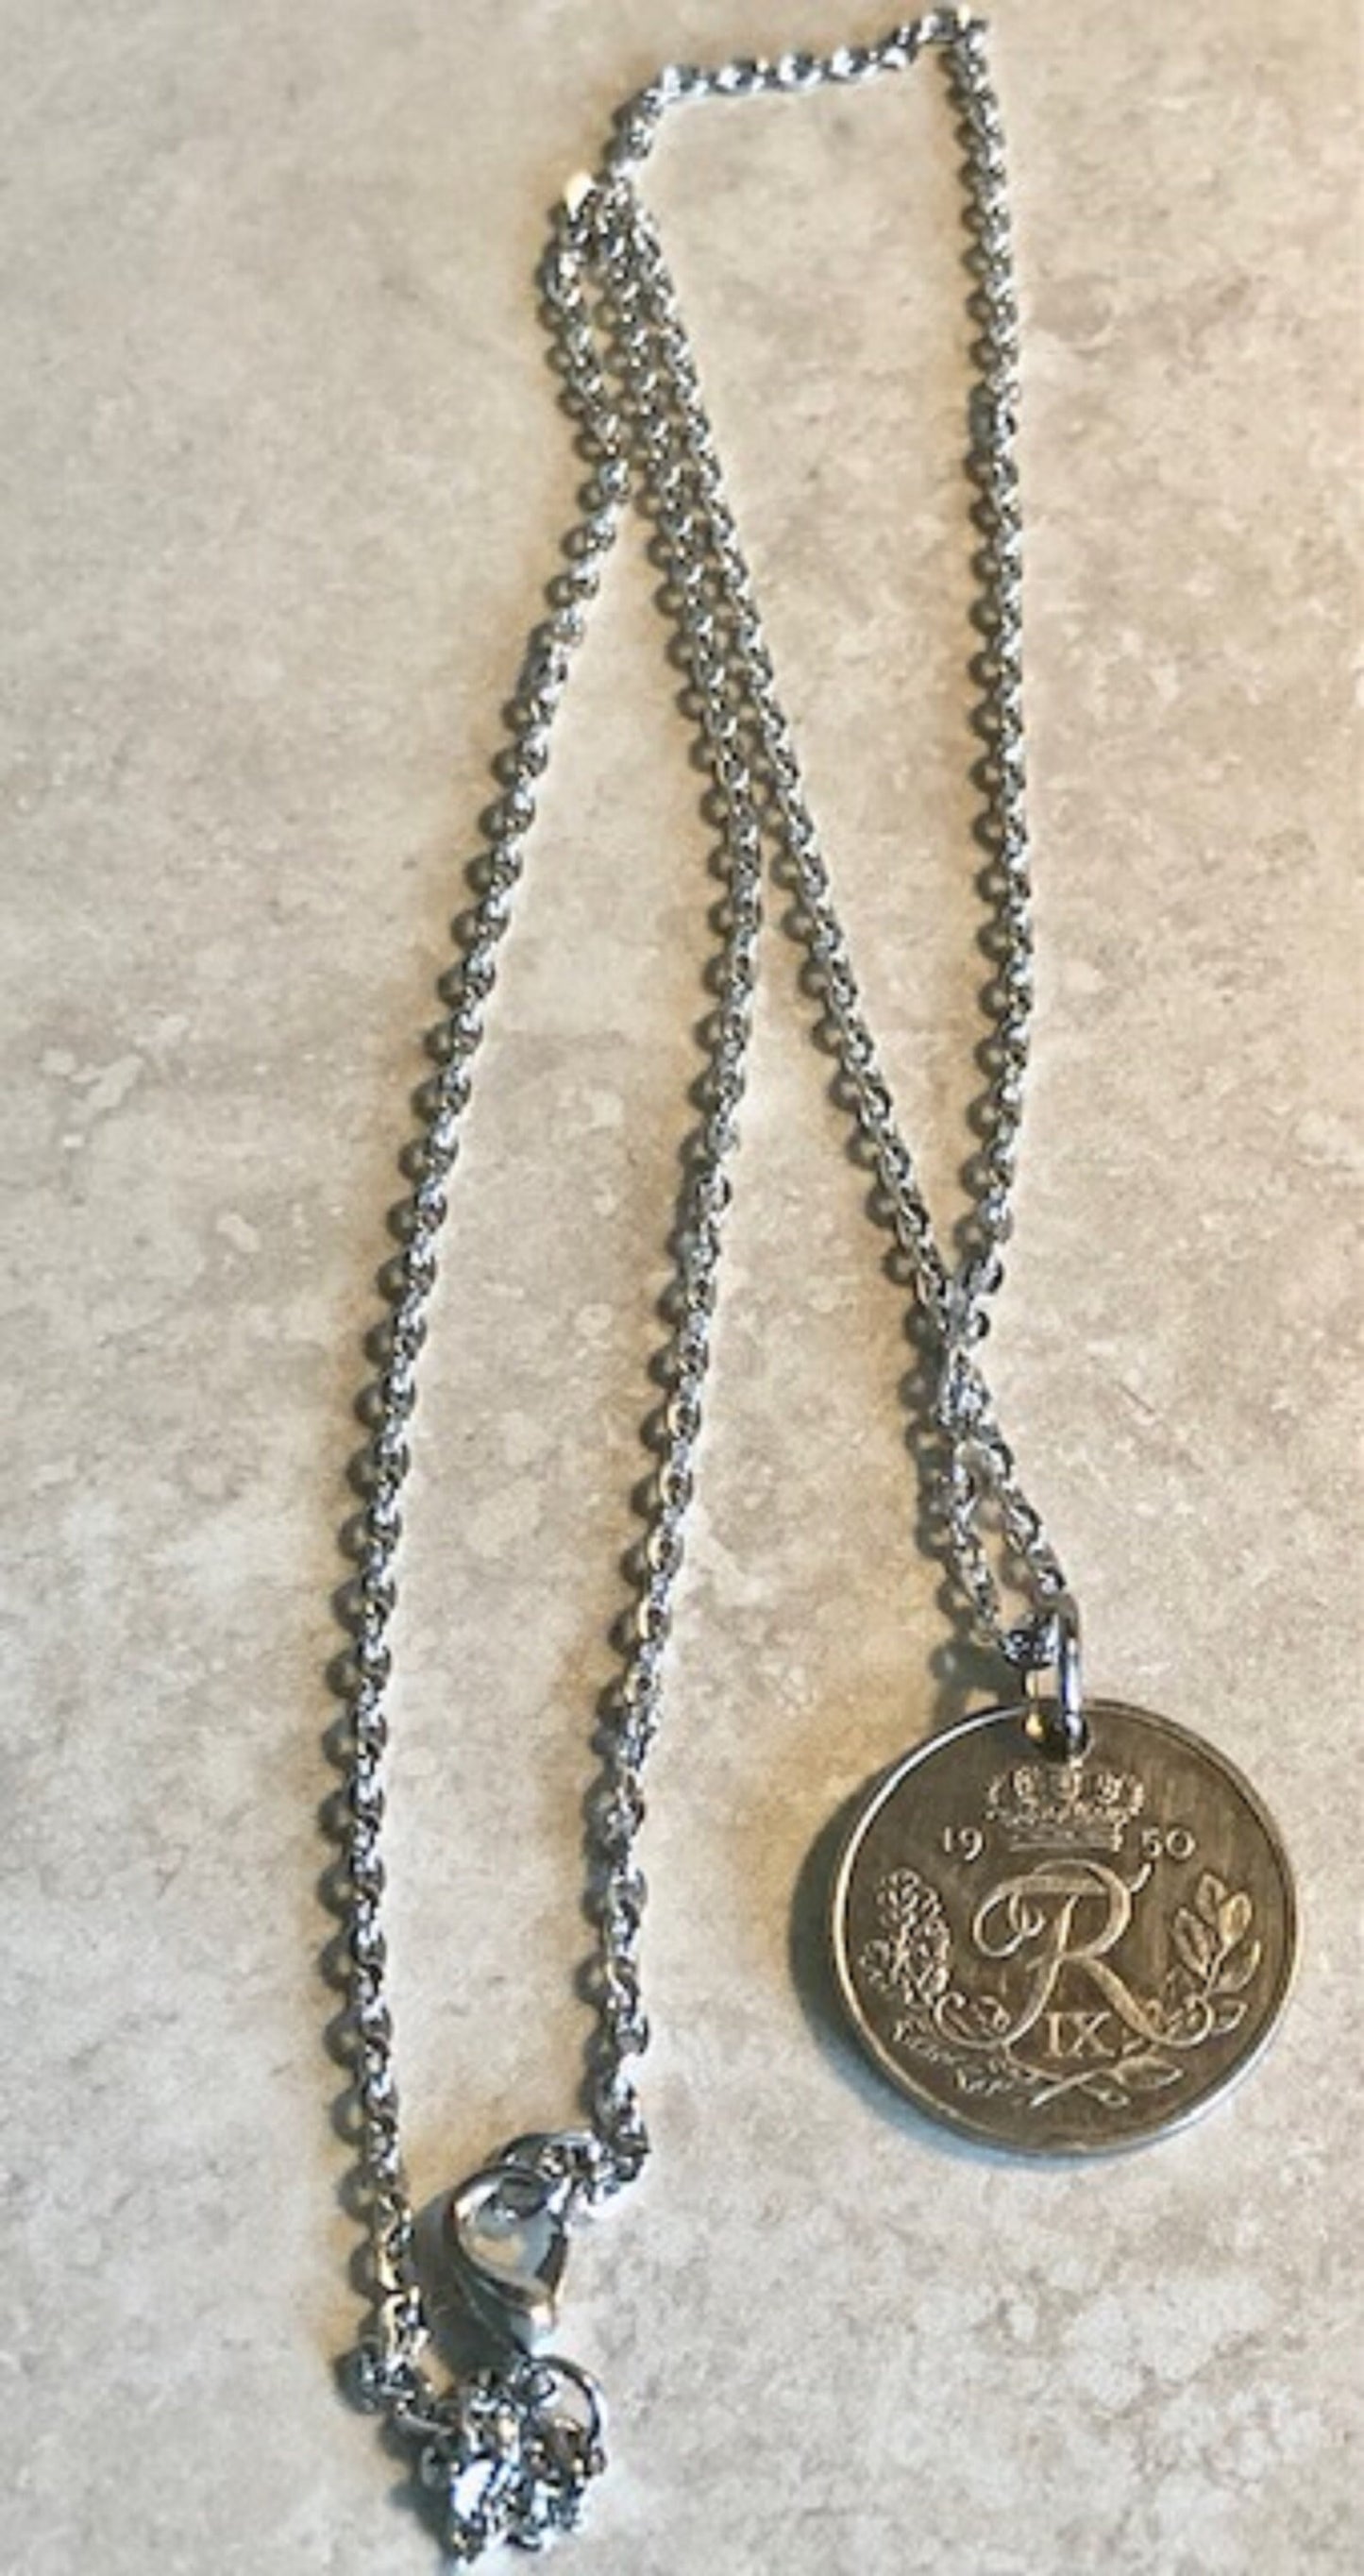 Denmark Coin Pendant 25 Ore Danmark Personal Necklace Old Vintage Handmade Jewelry Gift Friend Charm For Him Her World Coin Collector